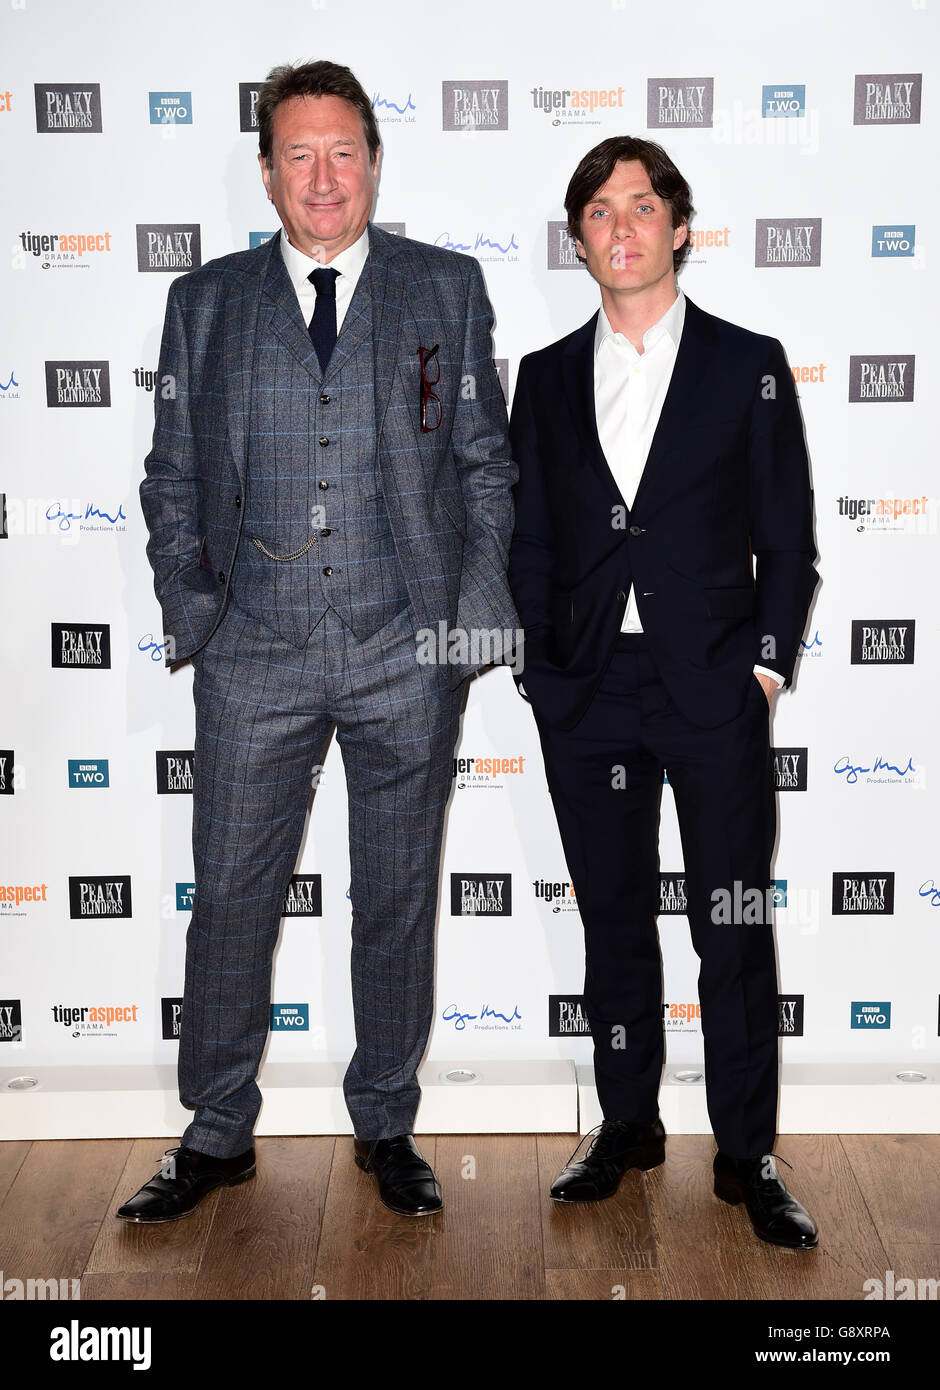 Steven Knight and Cillian Murphy (right) attending the Peaky Blinders Series Three premiere, at the BFI Southbank, London. PRESS ASSOCIATION Photo. Picture date: Tuesday May 3, 2016. Photo credit should read: Ian West/PA Wire Stock Photo